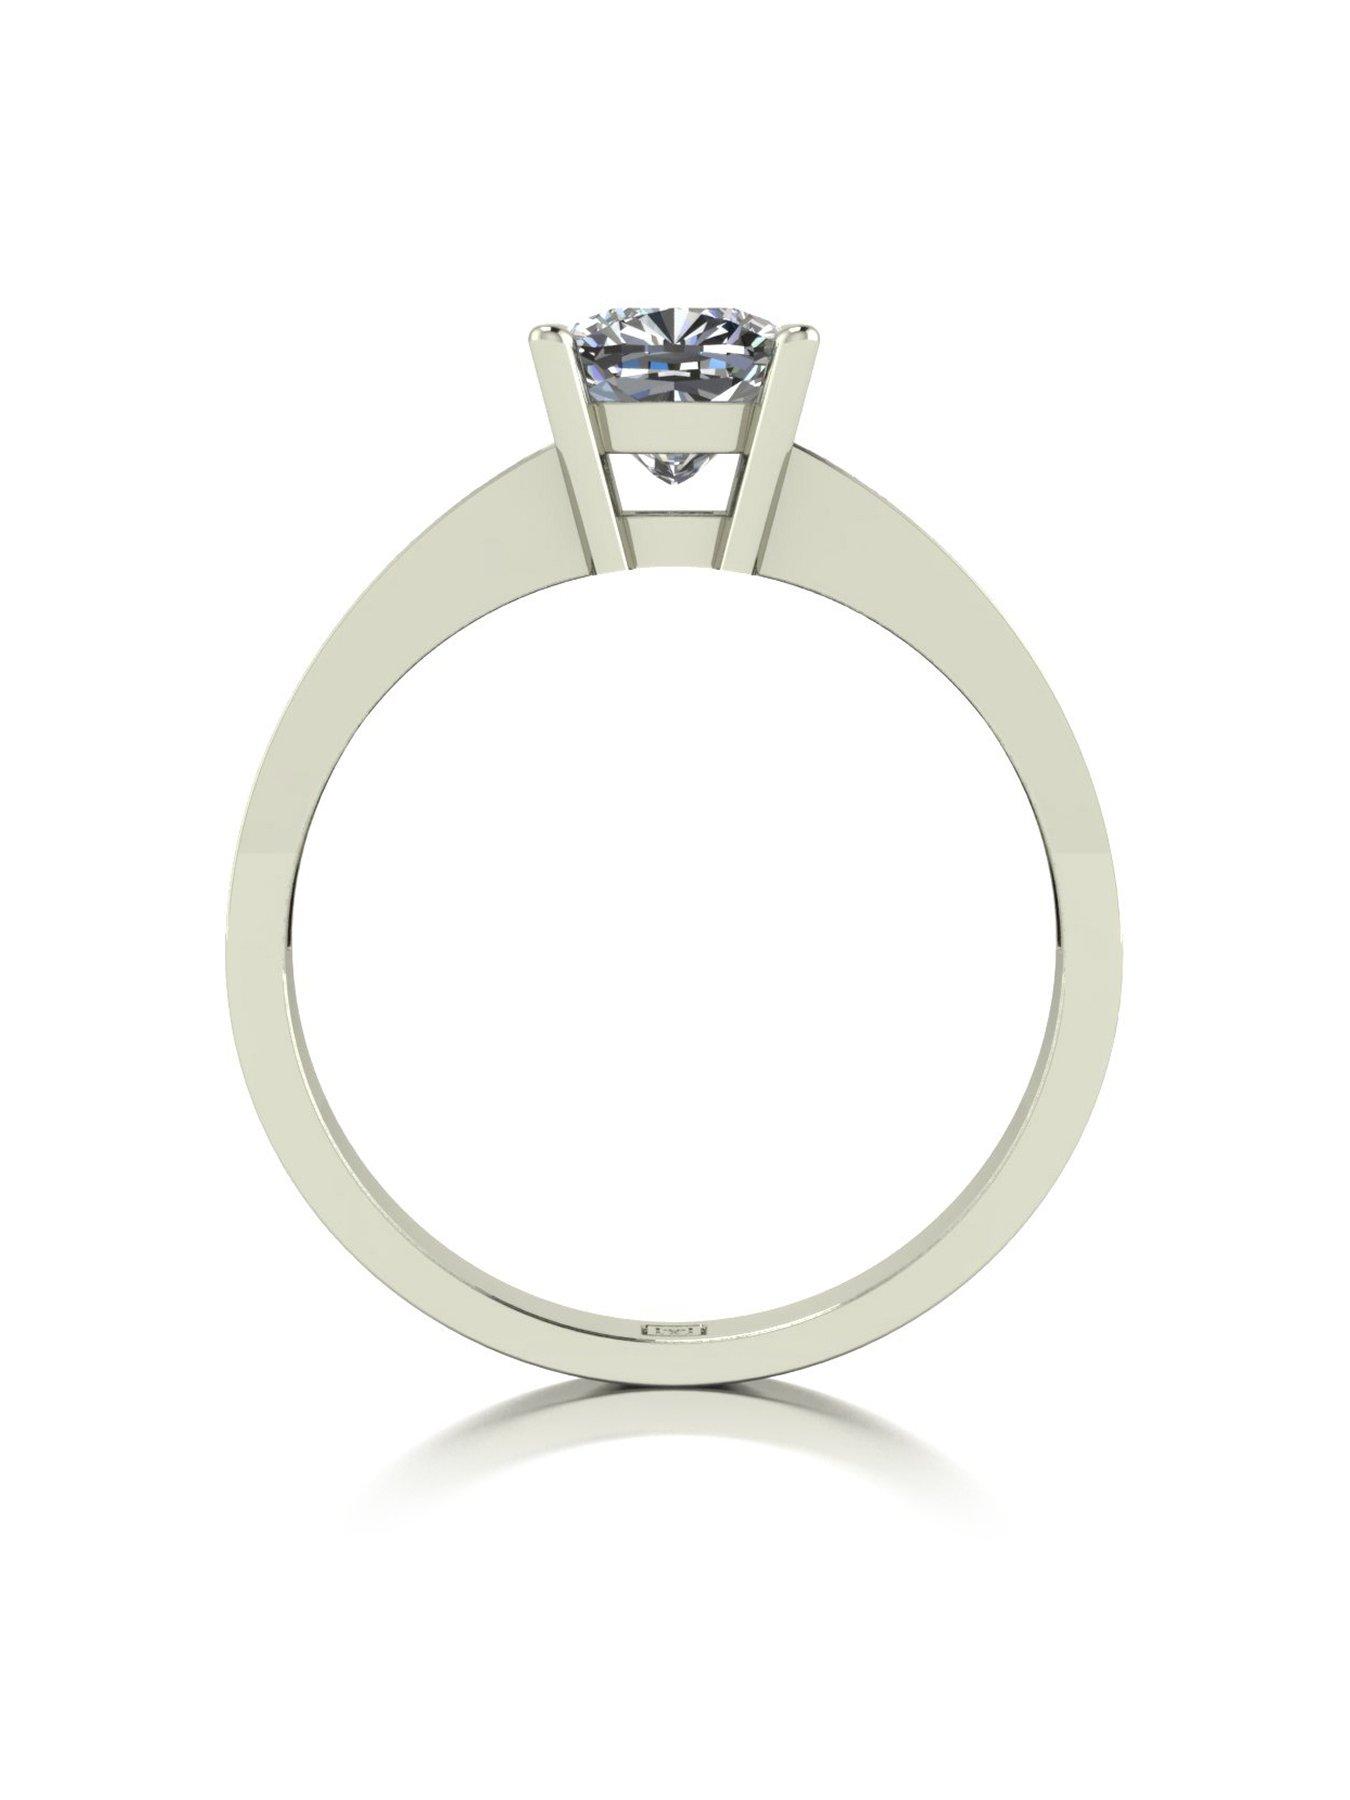  LADY LYNSEY MOISSANITE 9CT GOLD 1.35ct total CUSHION SOLITAIRE RING